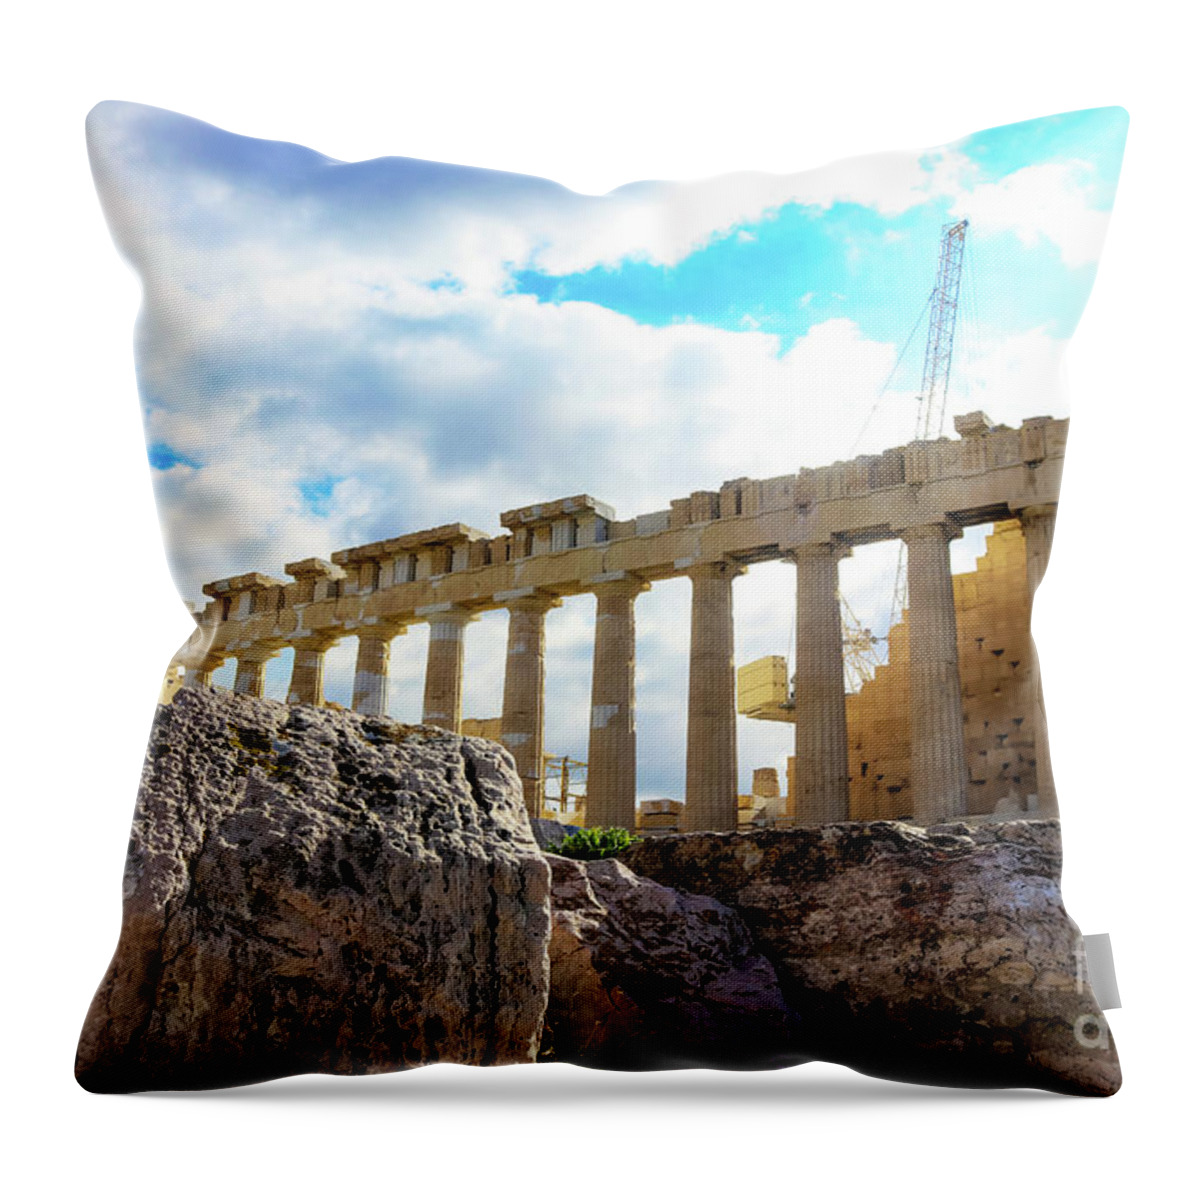 Parthenon Throw Pillow featuring the photograph Fallen columns in front of the Parthenon on the Athens Greece Acropolis by Susan Vineyard